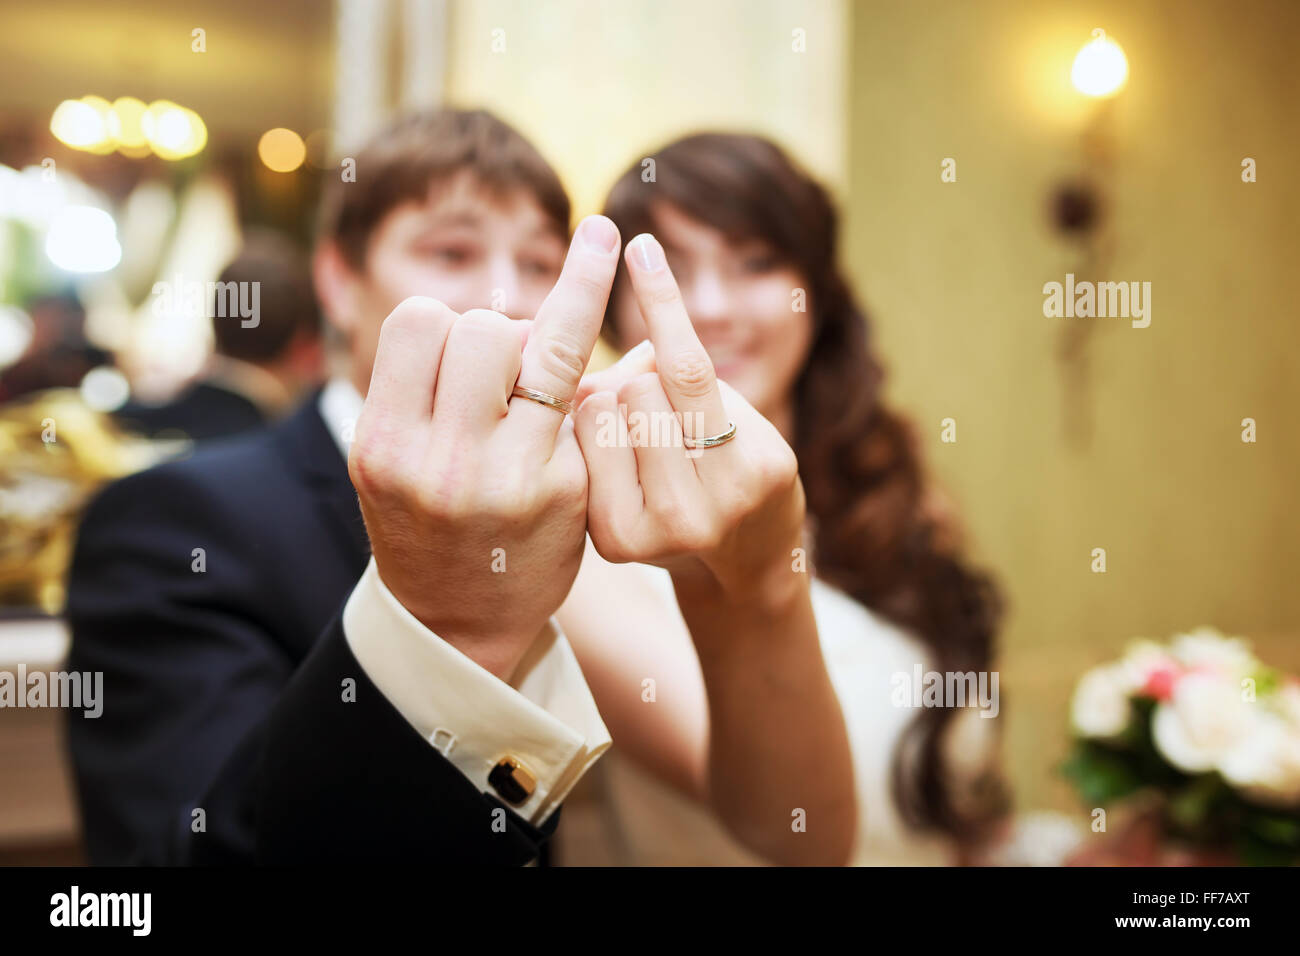 The bride and groom show wedding rings on fingers Stock Photo